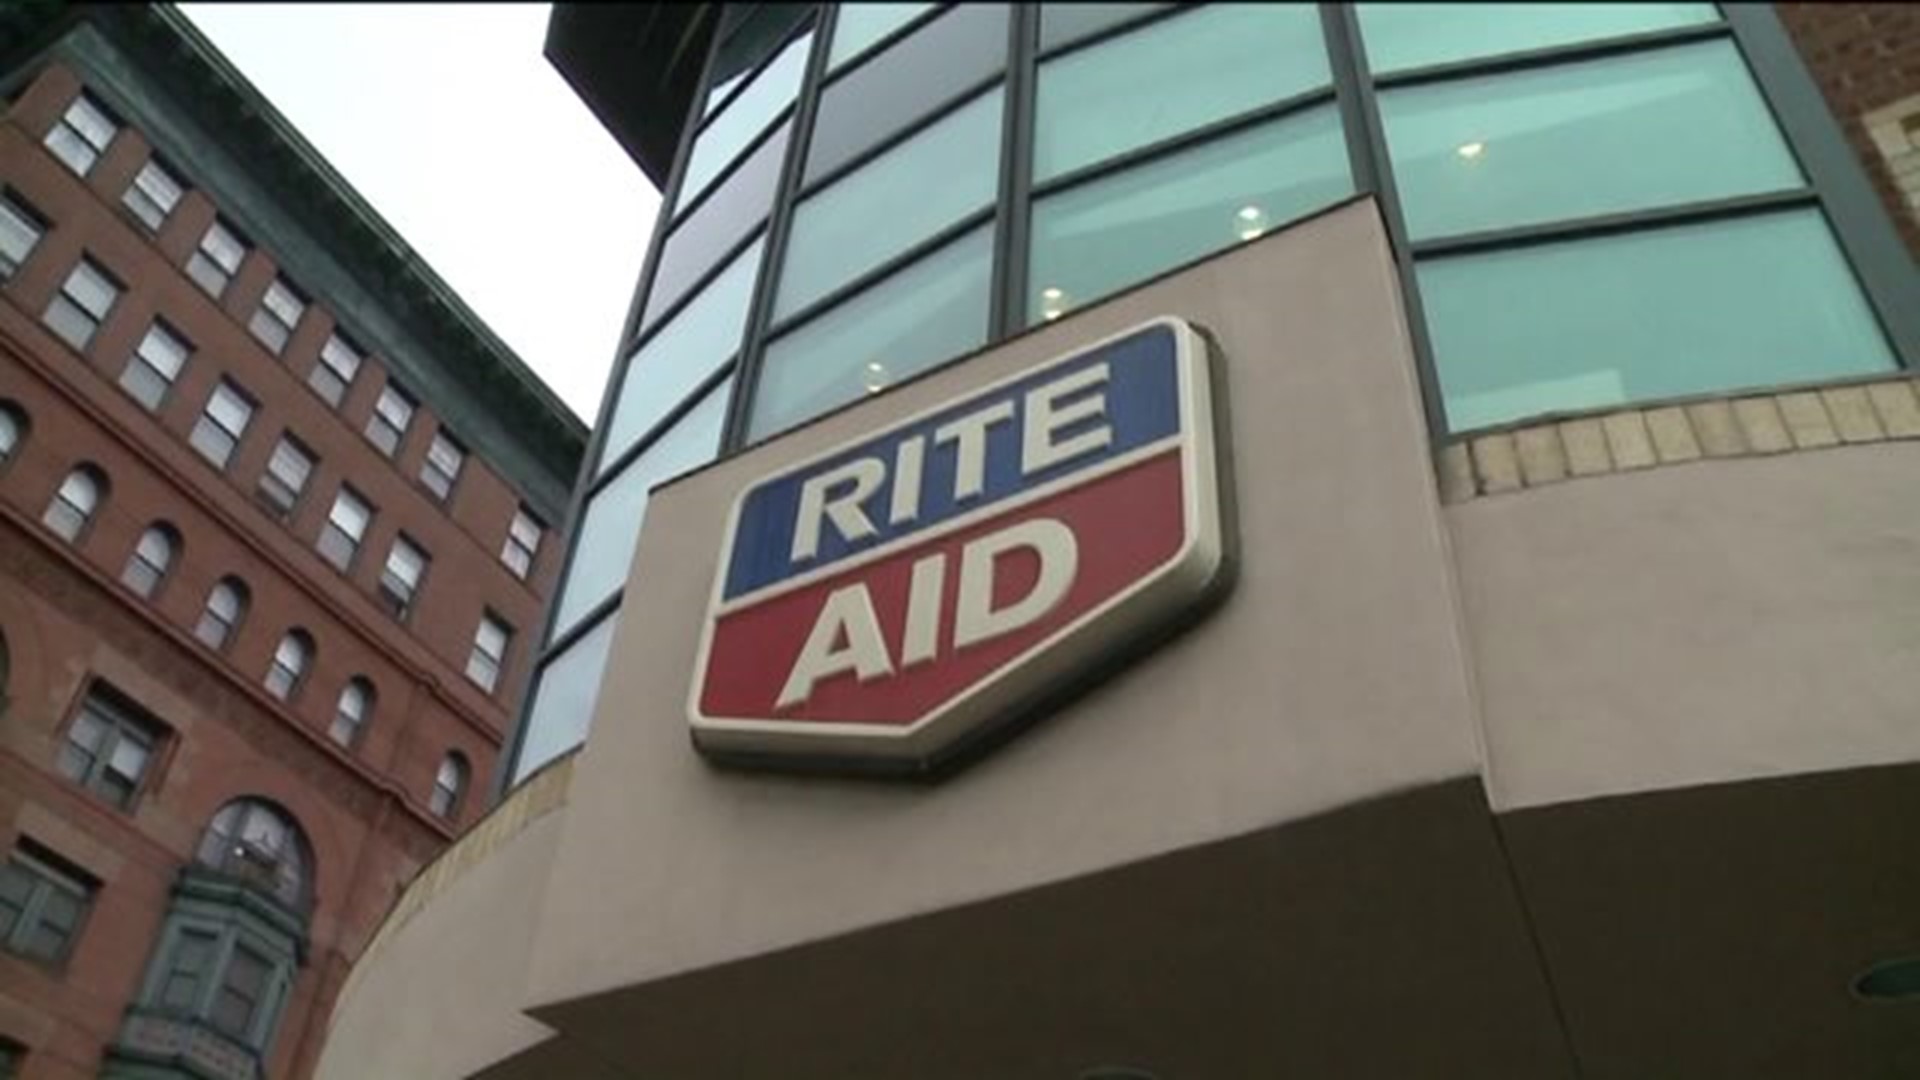 After Starting out in Scranton, Rite Aid Sold for $9.4 Billion